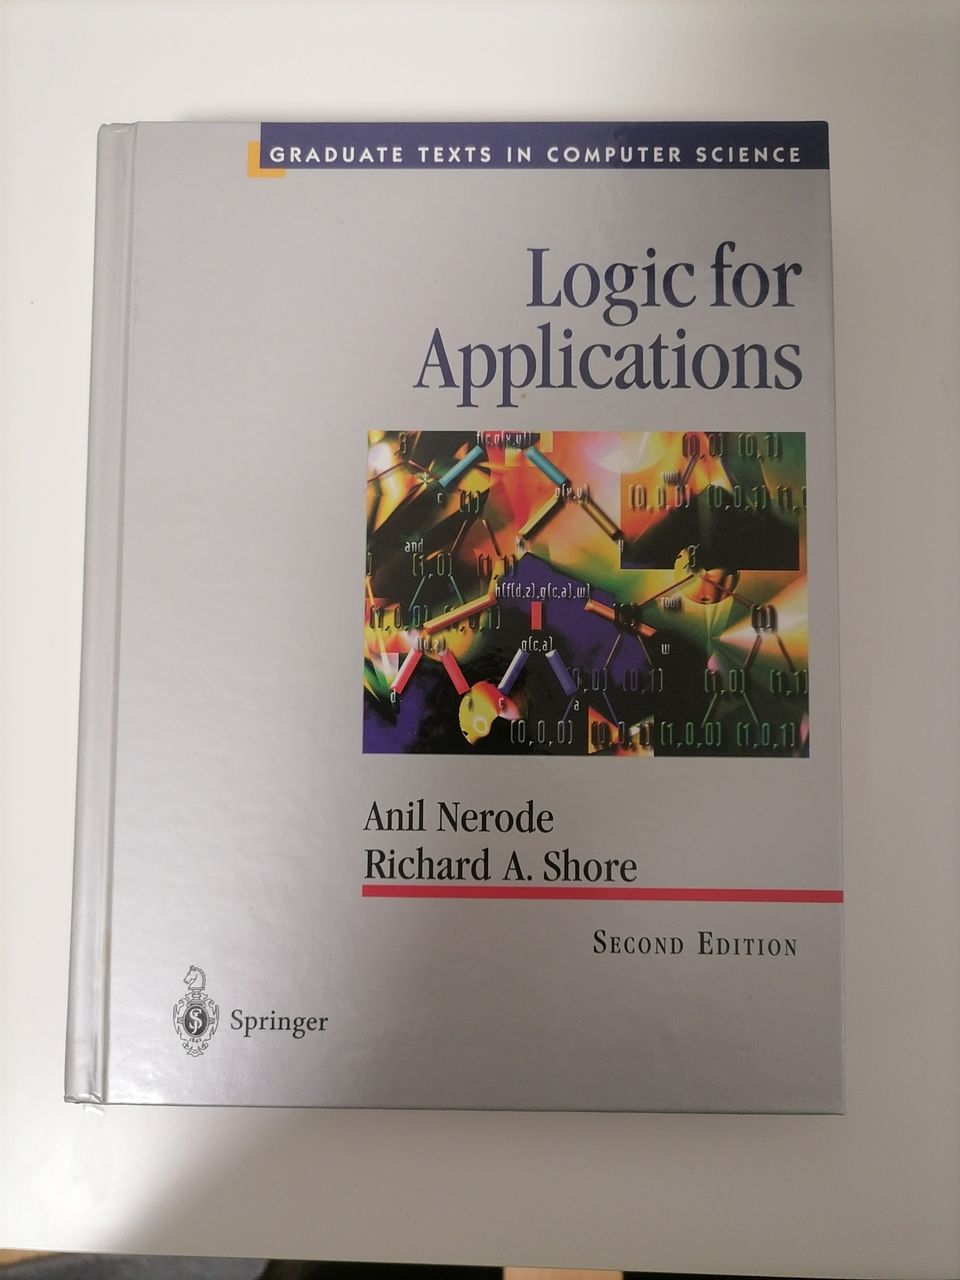 Logic for Applications (Texts in Computer Science) 2nd Edition